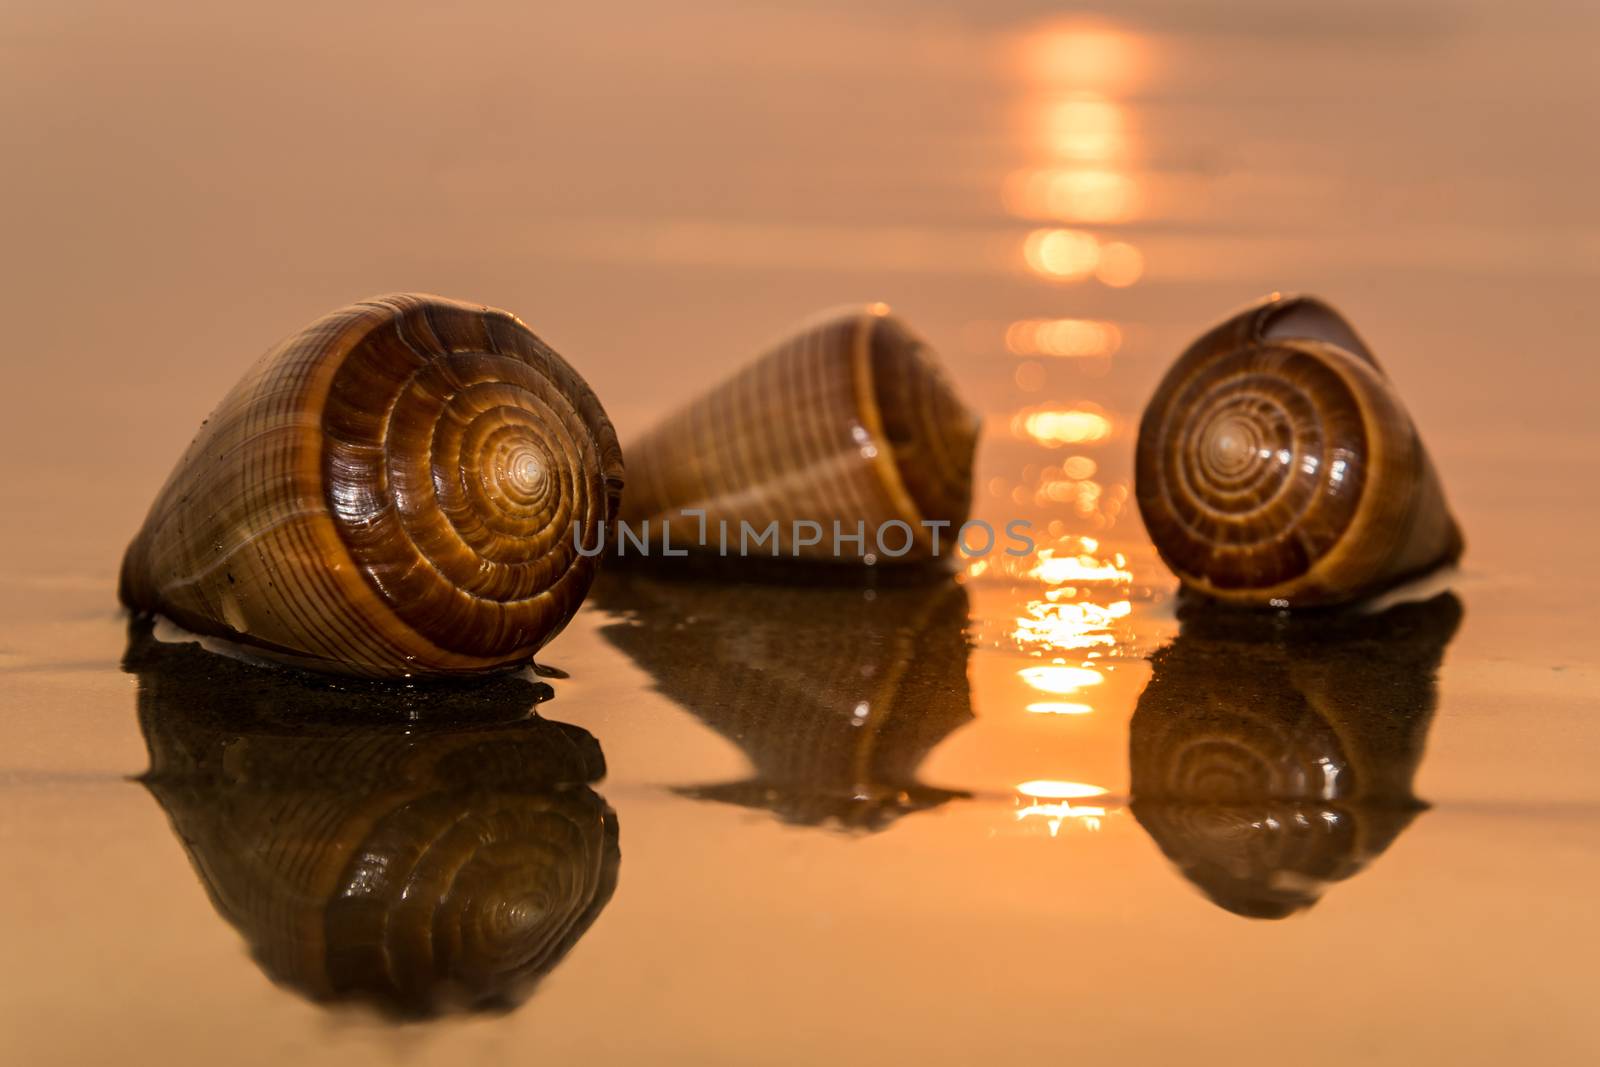 Spiral conch shells on a beach during sunset